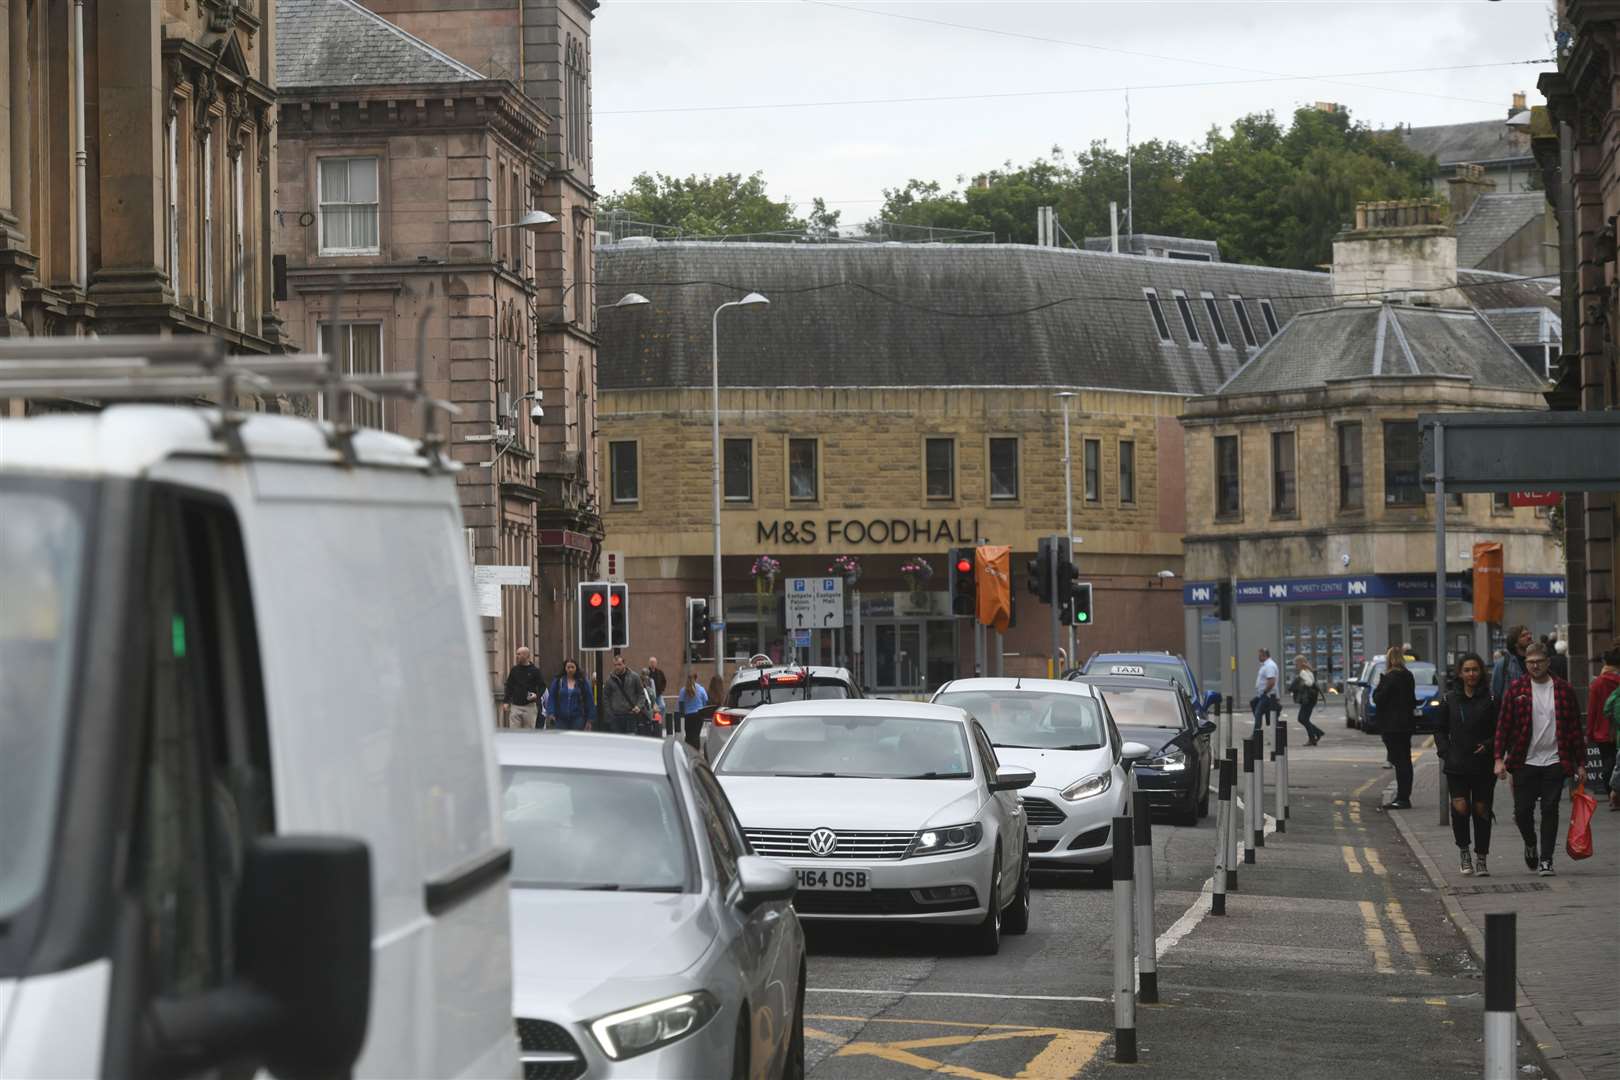 Opinion is divided over proposals to change arrangements on Academy Street. Picture: James Mackenzie